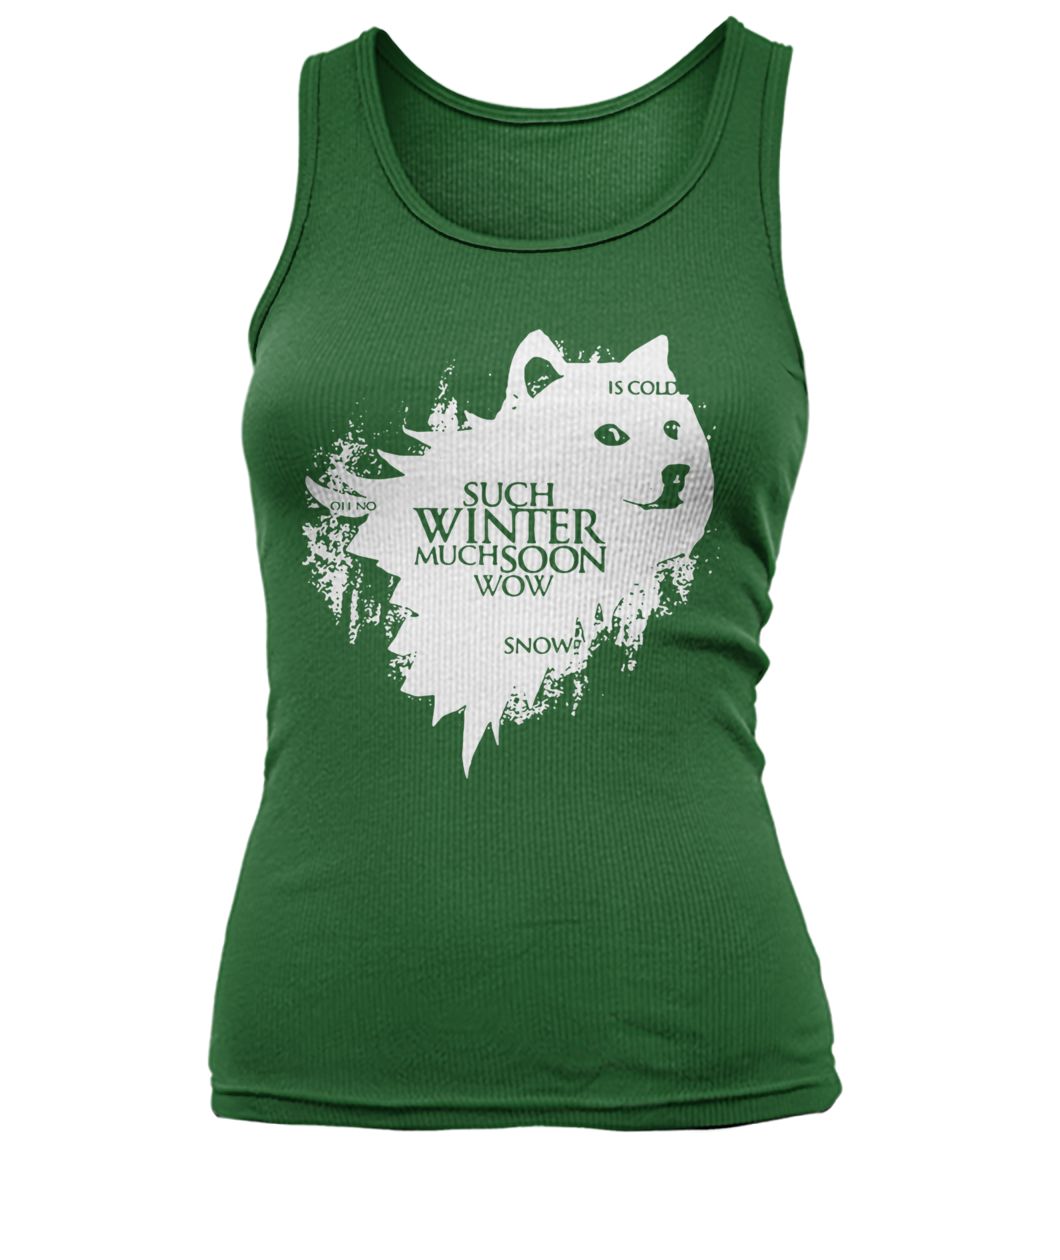 Game of thrones doge oh no such winter much soon wow snow is cold women's tank top